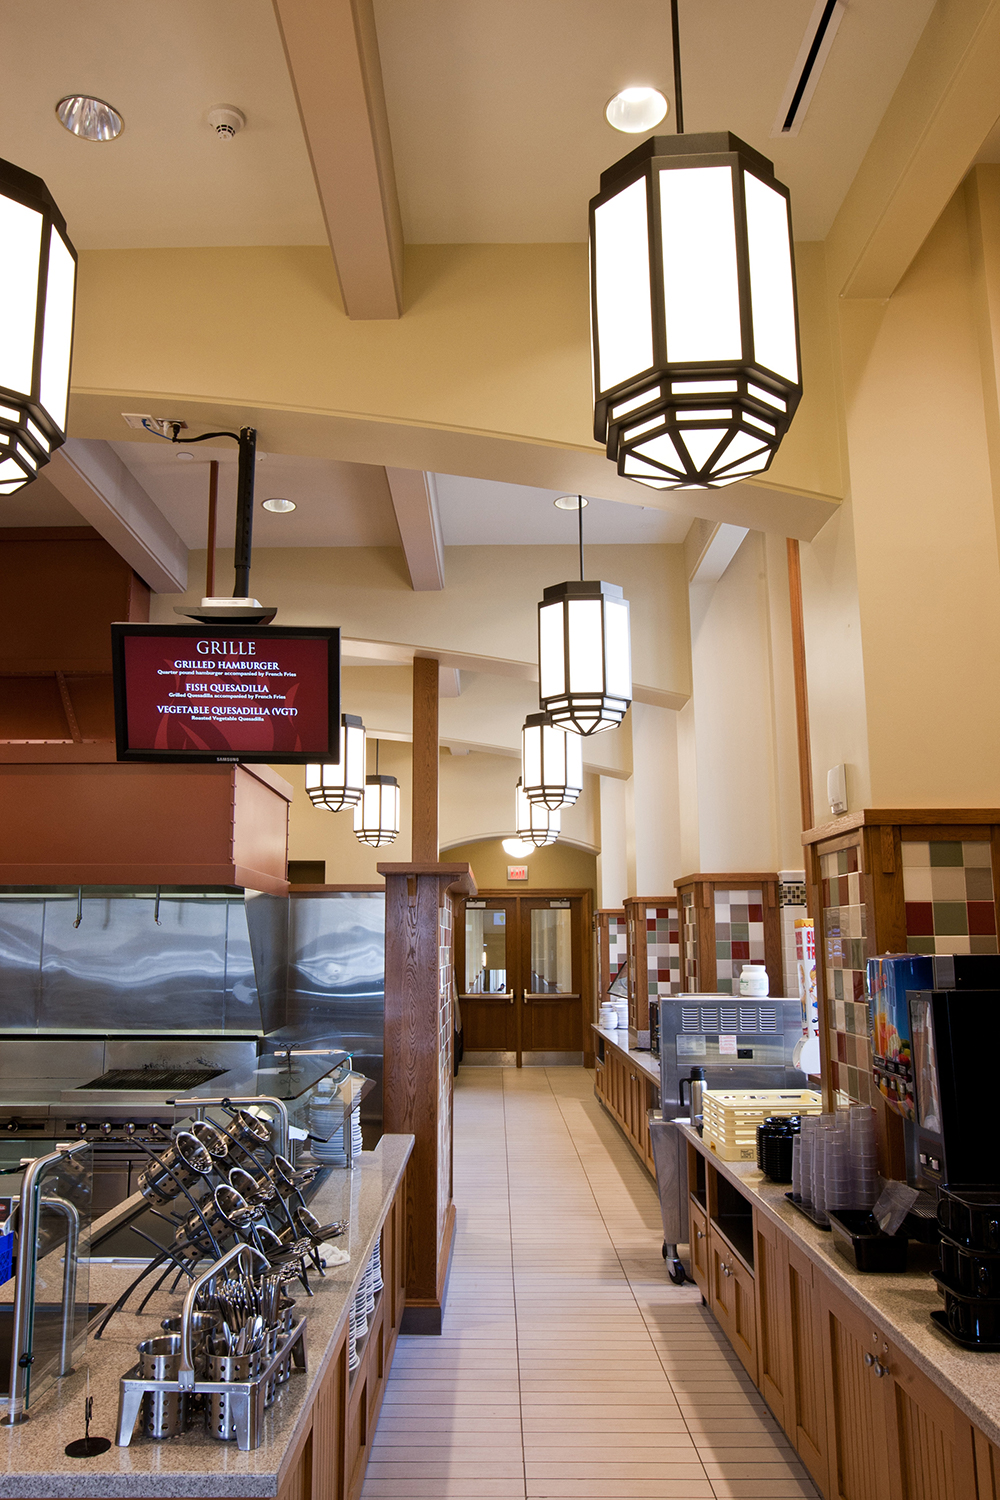 Bold, lantern-style custom light fixtures lined above a clean, classically styled campus kitchen.